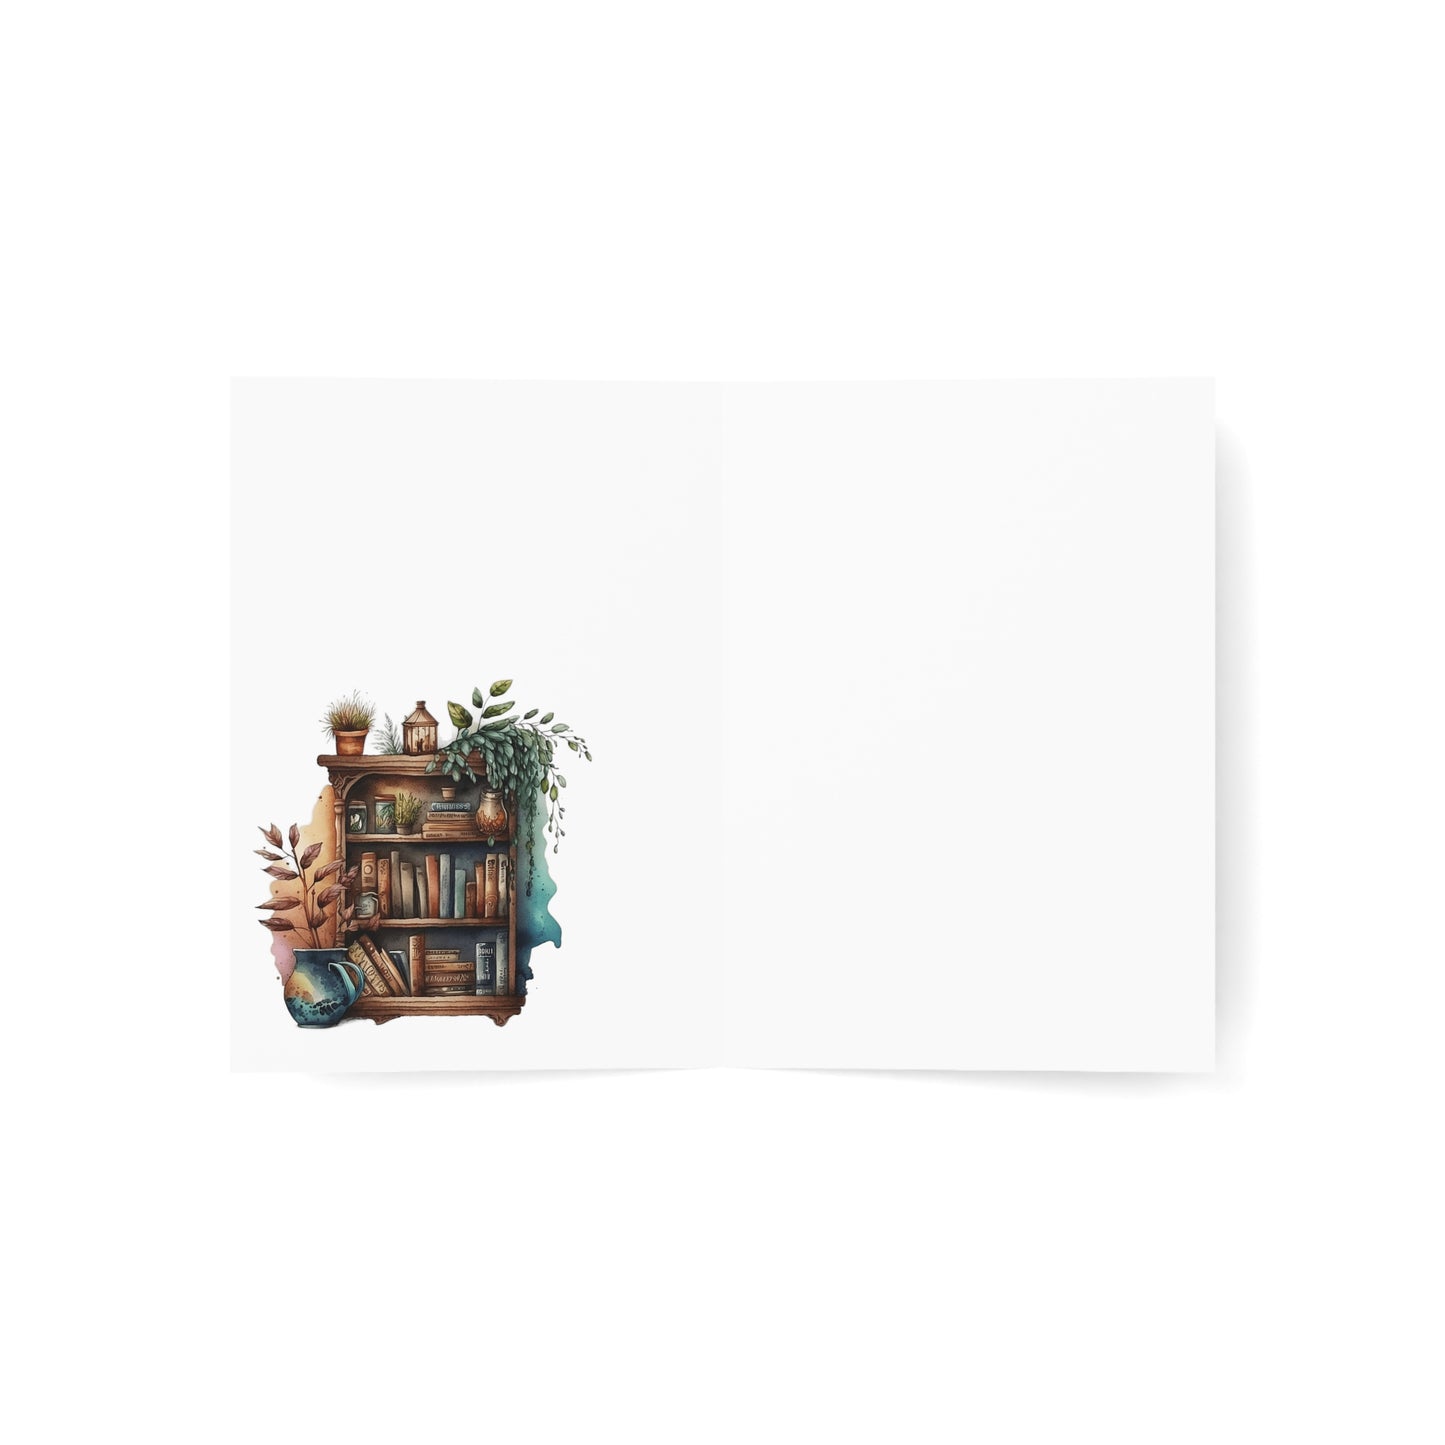 Greeting Cards (1, 10, 30, and 50pcs) “I read books and I know things. That’s what I do.”